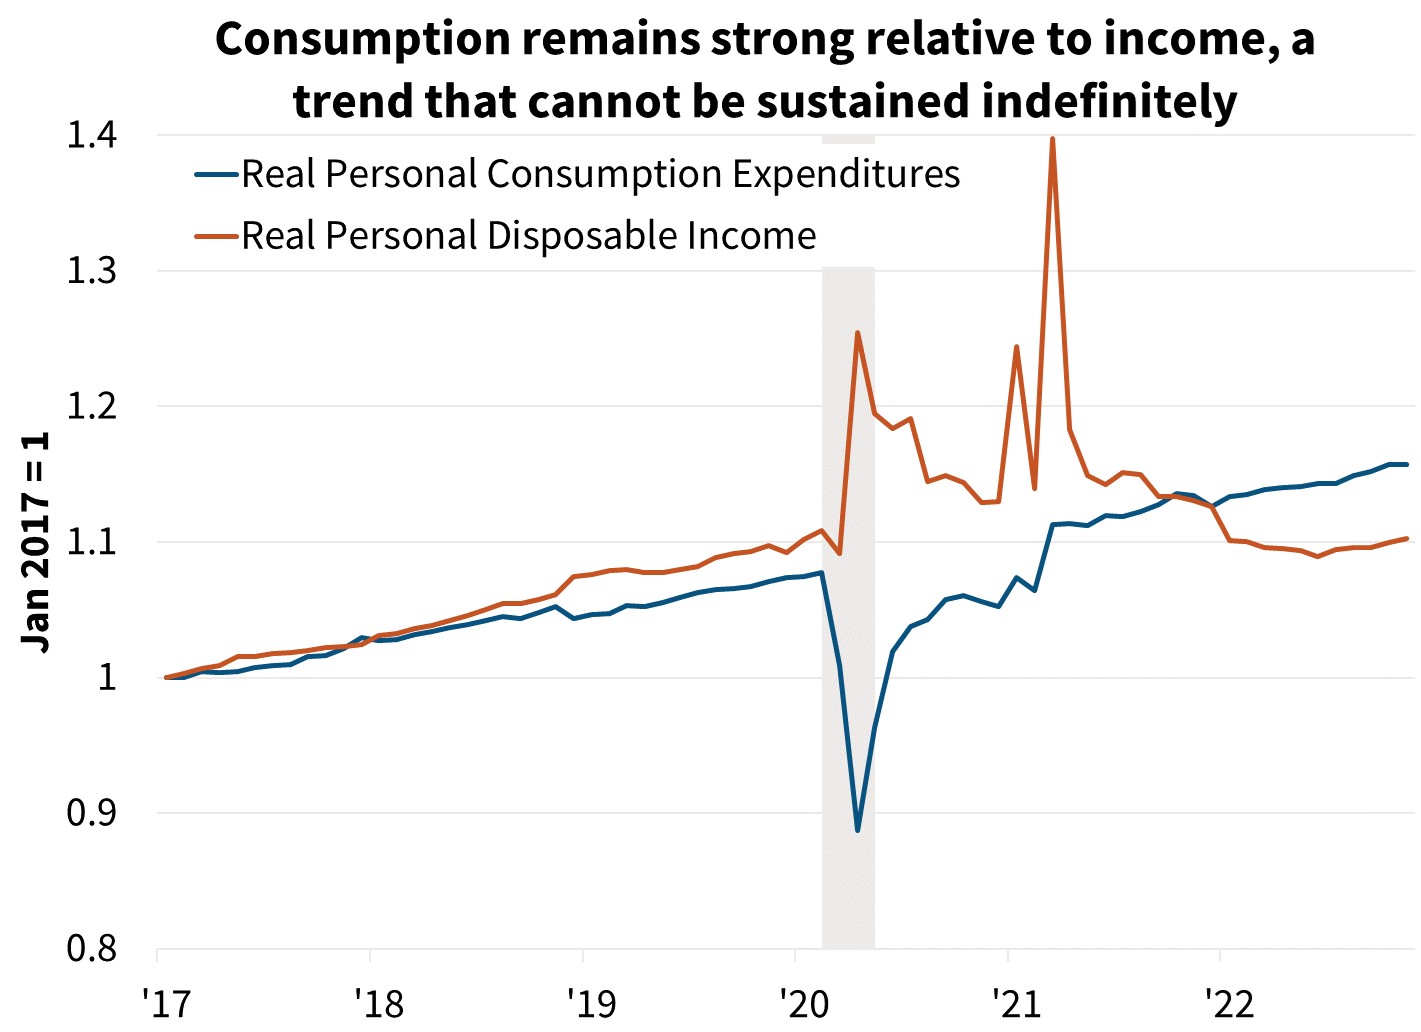  Consumption remains strong relative to income, a trend that cannot be sustained indefinitely 